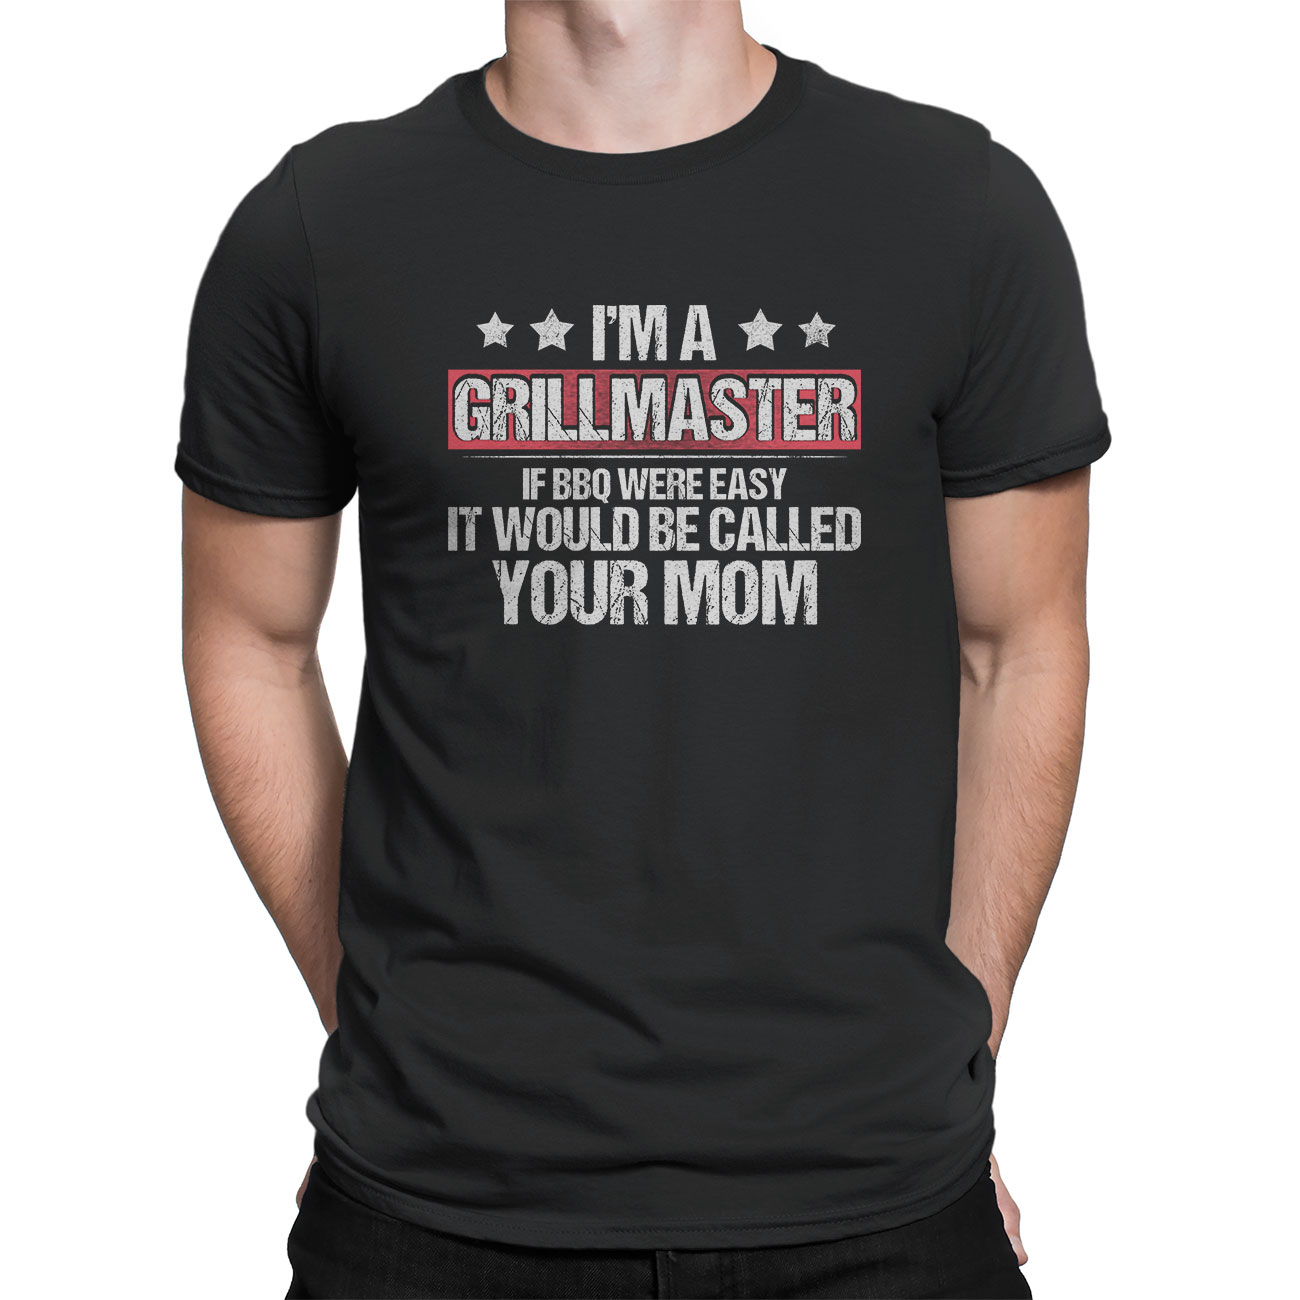 Men’s Funny T-shirts – I’m A Grillmaster If BBQ Were Easy It Would Be ...